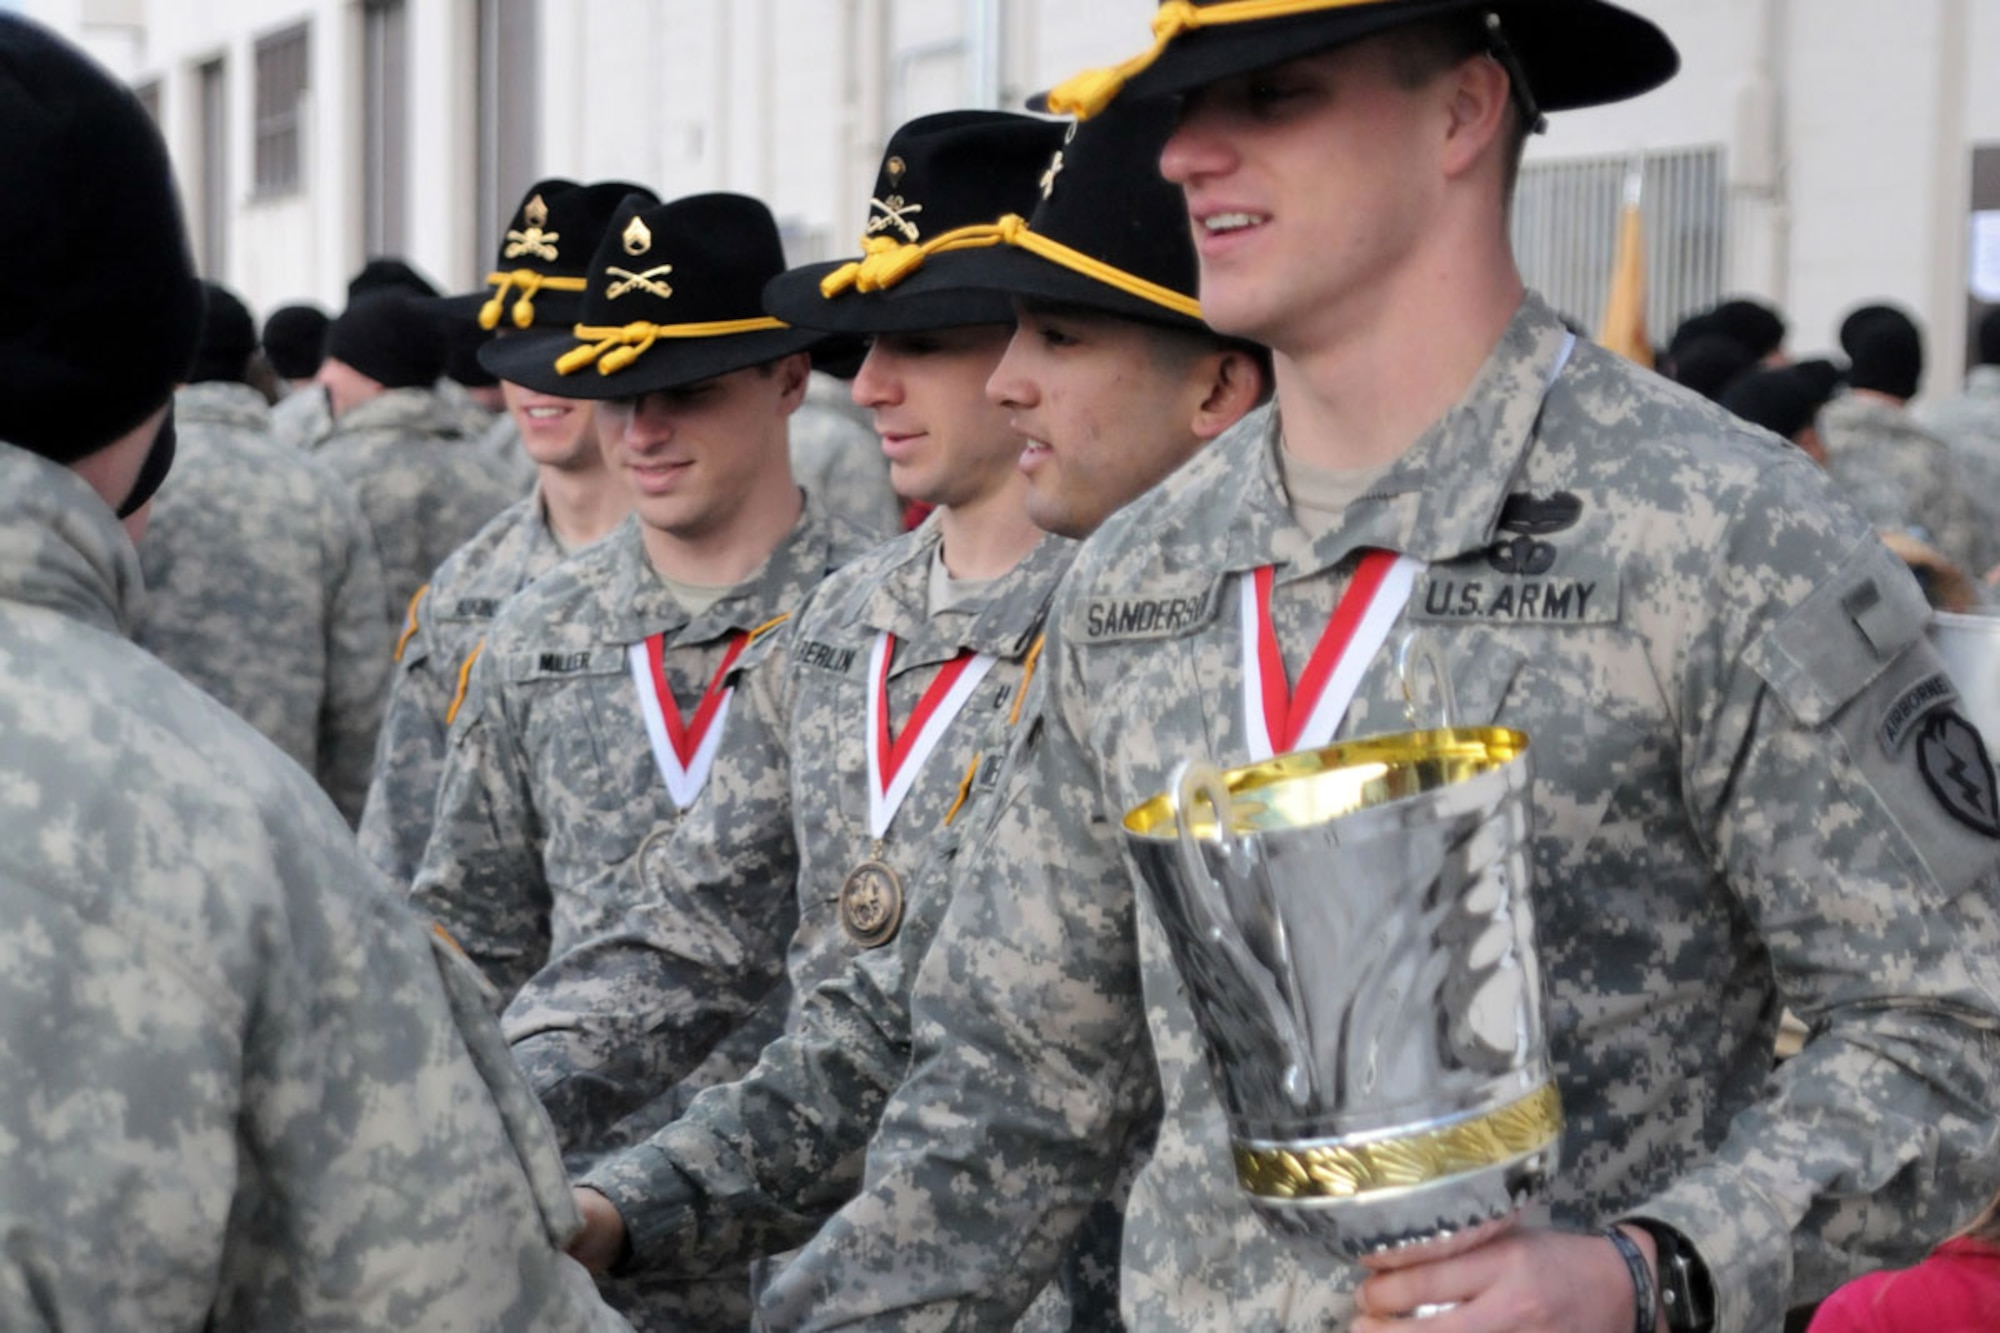 Gainey Cup champions with the 1st Squadron (Airborne), 40th Cavalry Regiment, receive congratulatory handshakes from their comrades during a ceremony to honor their achievement Saturday at JBER. (U.S. Army photo/Staff Sgt. Jeffrey Smith)